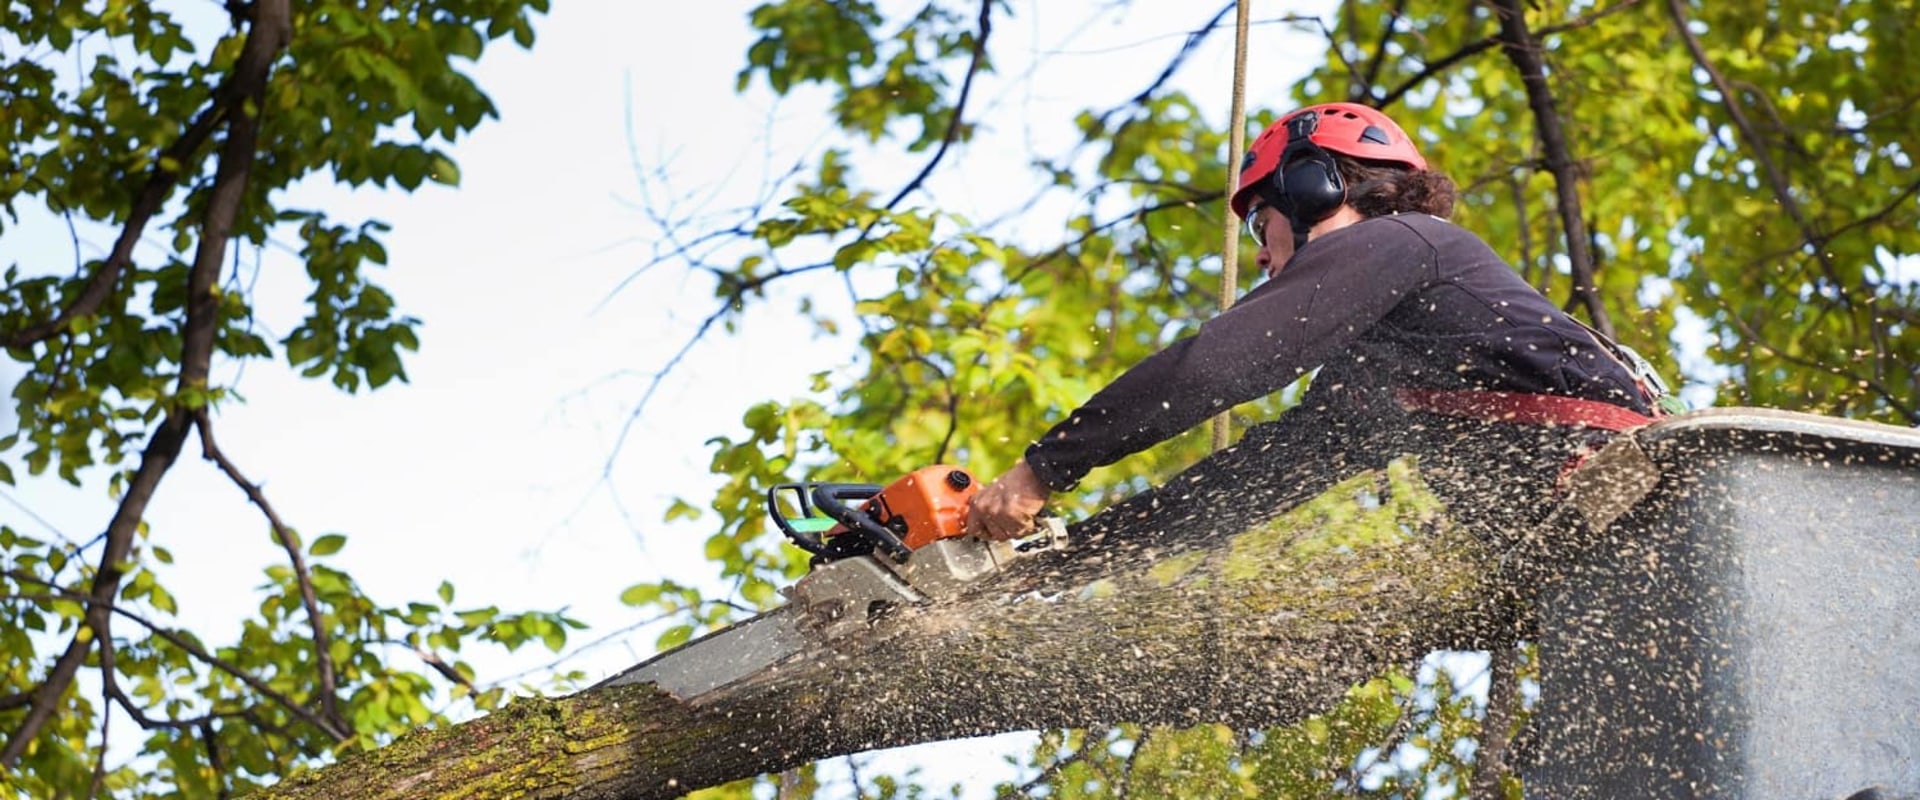 Should You DIY or Hire a Professional for Residential Tree Removal?